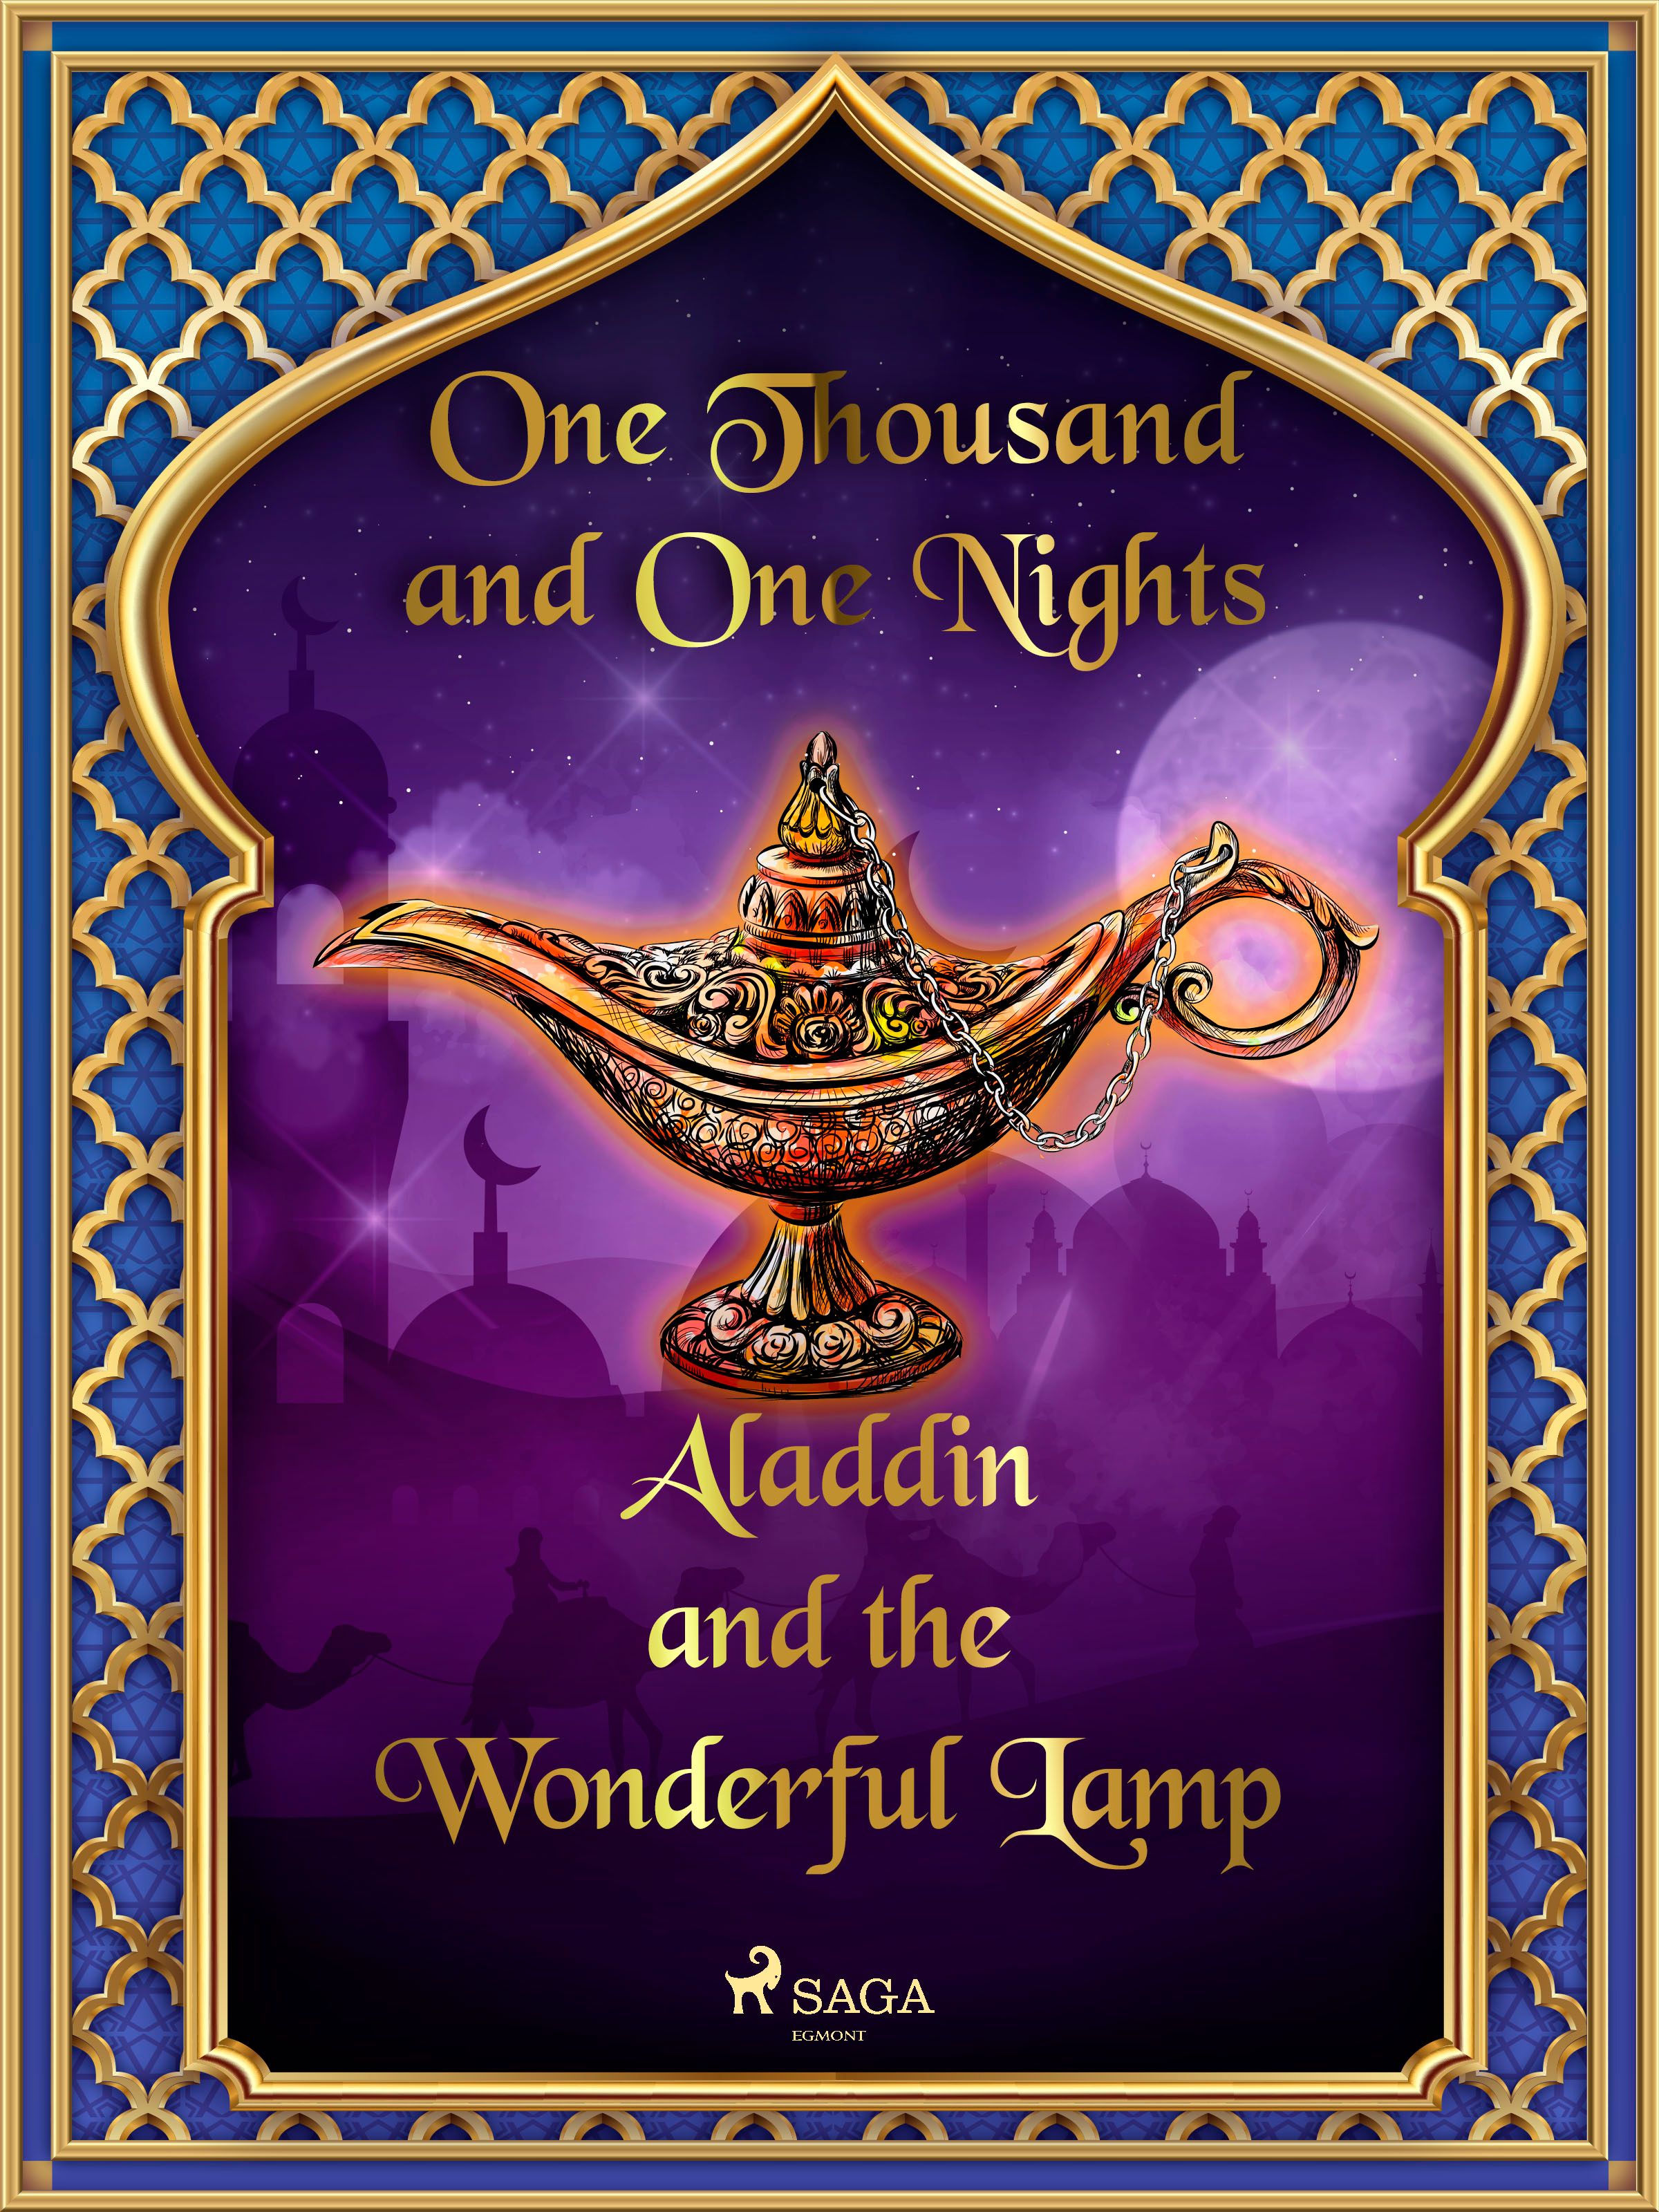 Aladdin and the Wonderful Lamp, eBook by One Thousand and One Nights